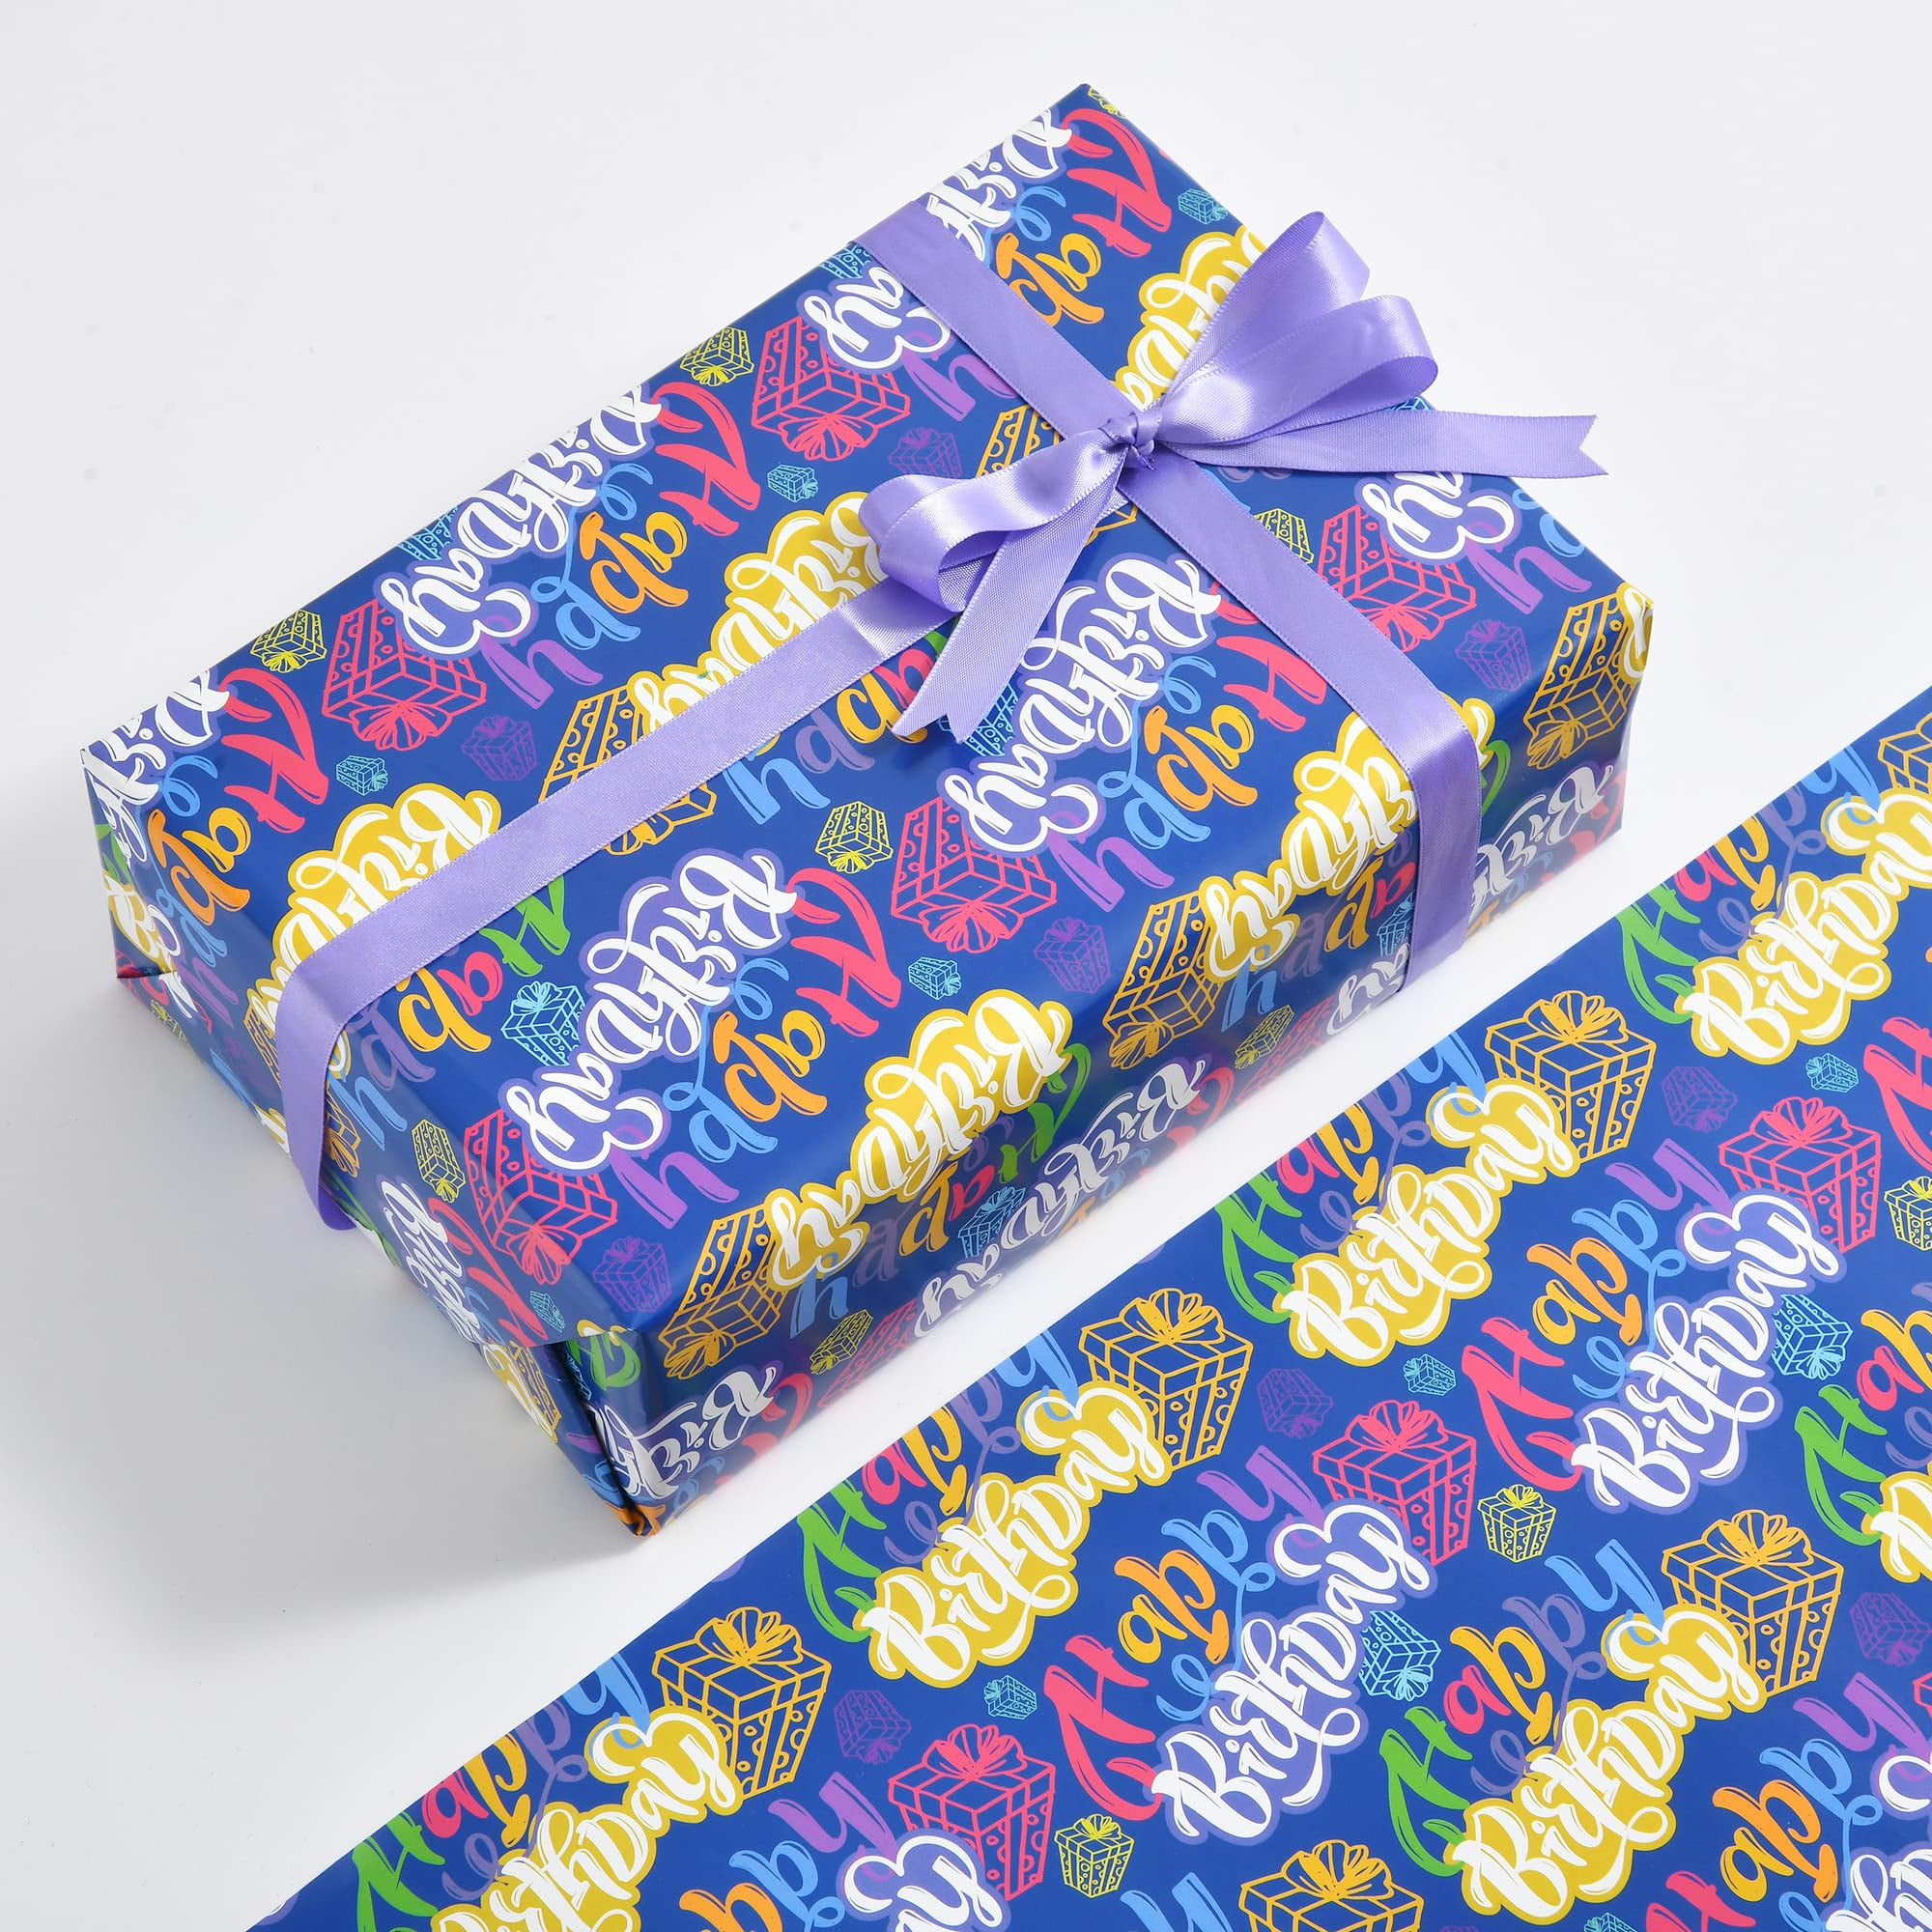 Titiweet Construction Wrapping Paper - Truck Wrapping Paper for Boys, Kids,  12 Sheets Tractor & Trucks Wrapping Paper for Birthday Holiday, 20 x 28